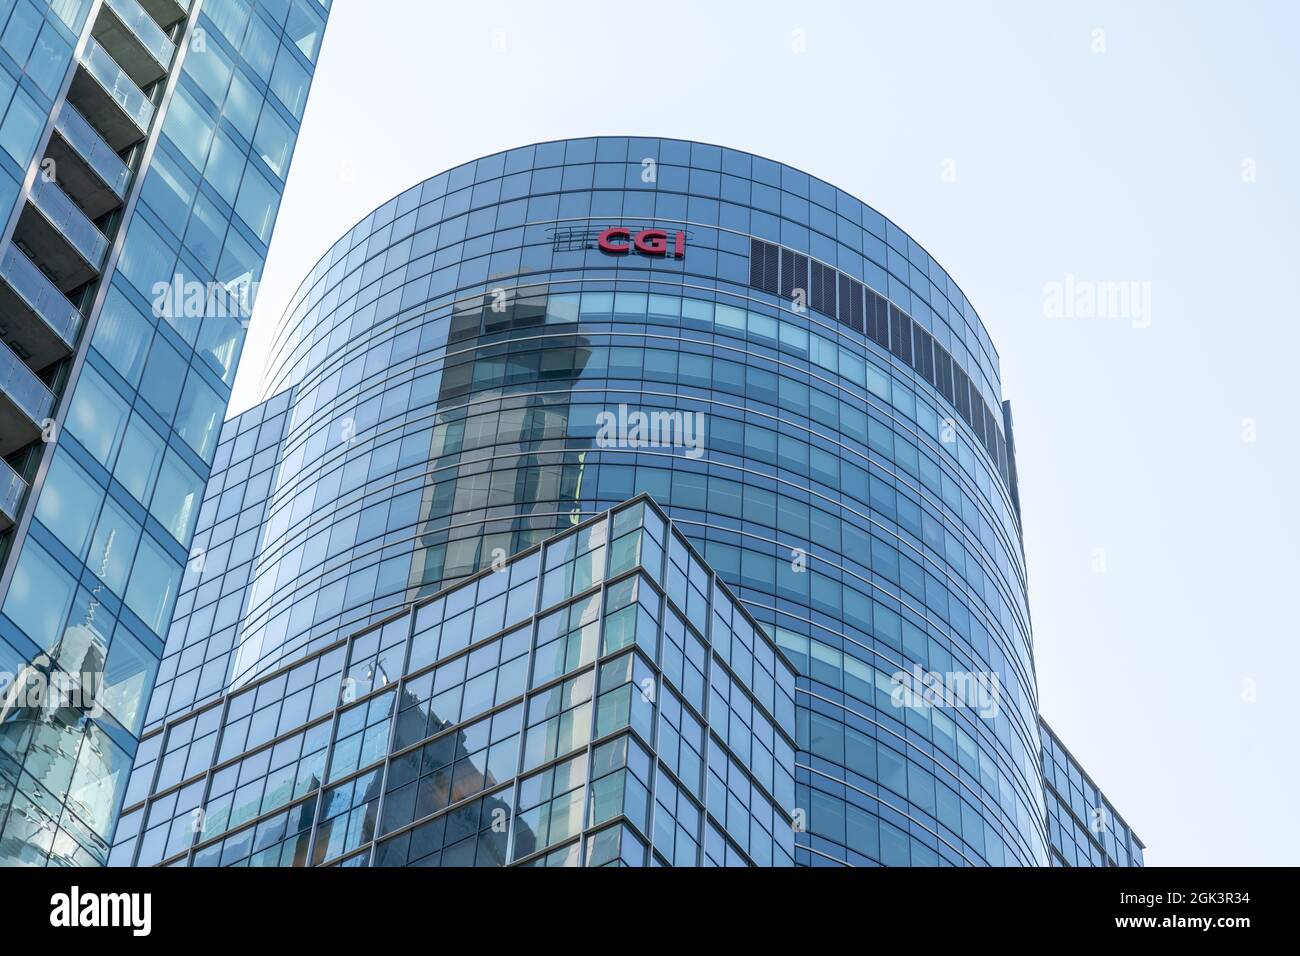 Montreal, QC, Canada - September 4, 2021: CGI headquarters in Montreal, QC, Canada. Stock Photo